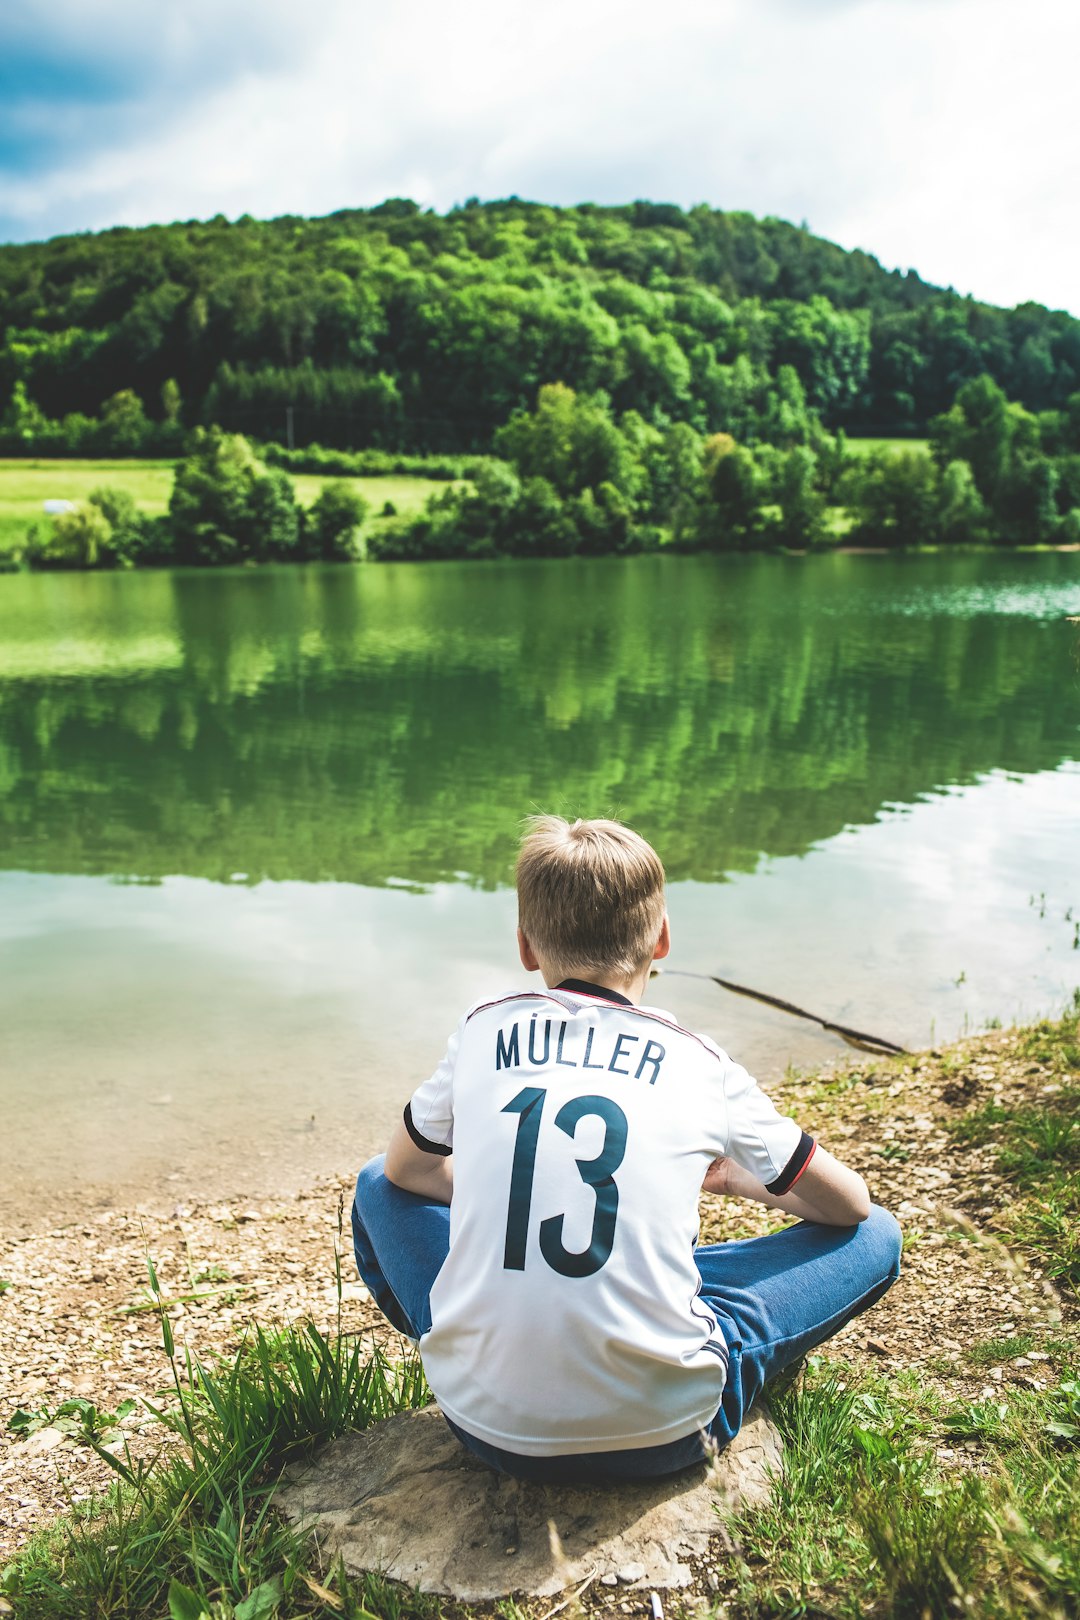 boy in white and blue shirt sitting on blue chair near lake during daytime